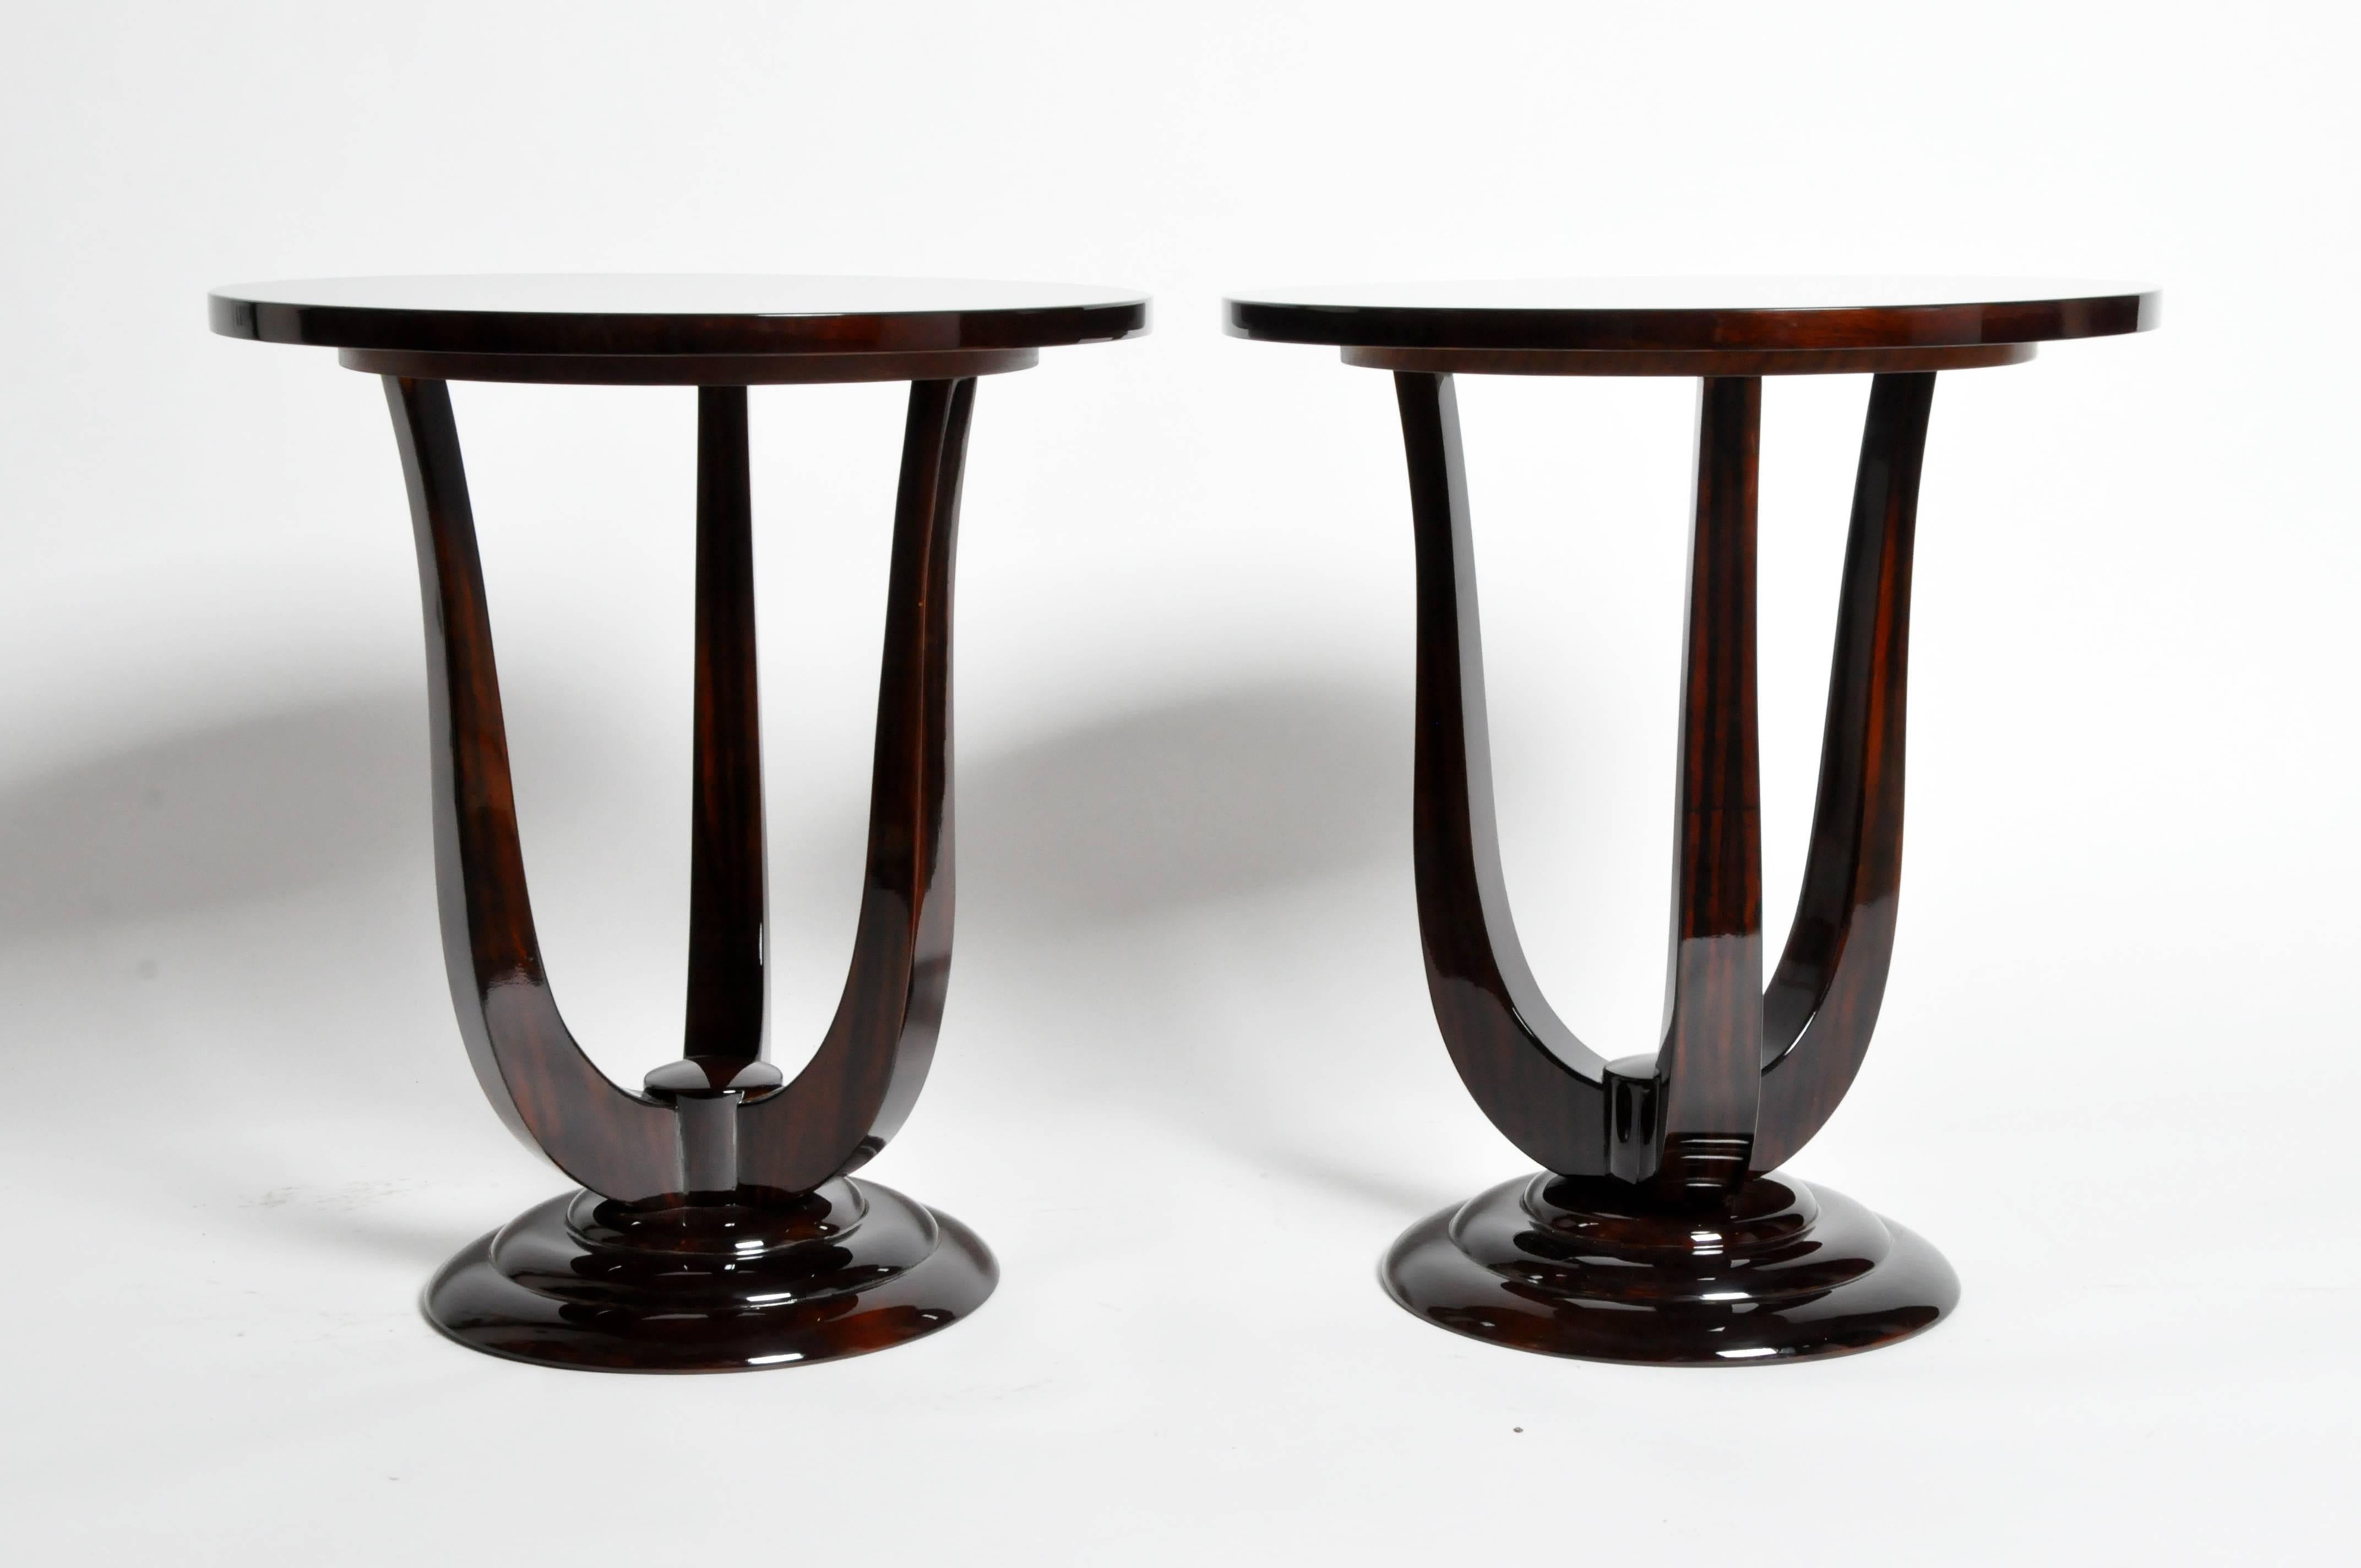 These elegant Mid-Century style side tables are from Hungary and made from Macassar veneer. They are great for side tables or end tables. Price is for each table. 